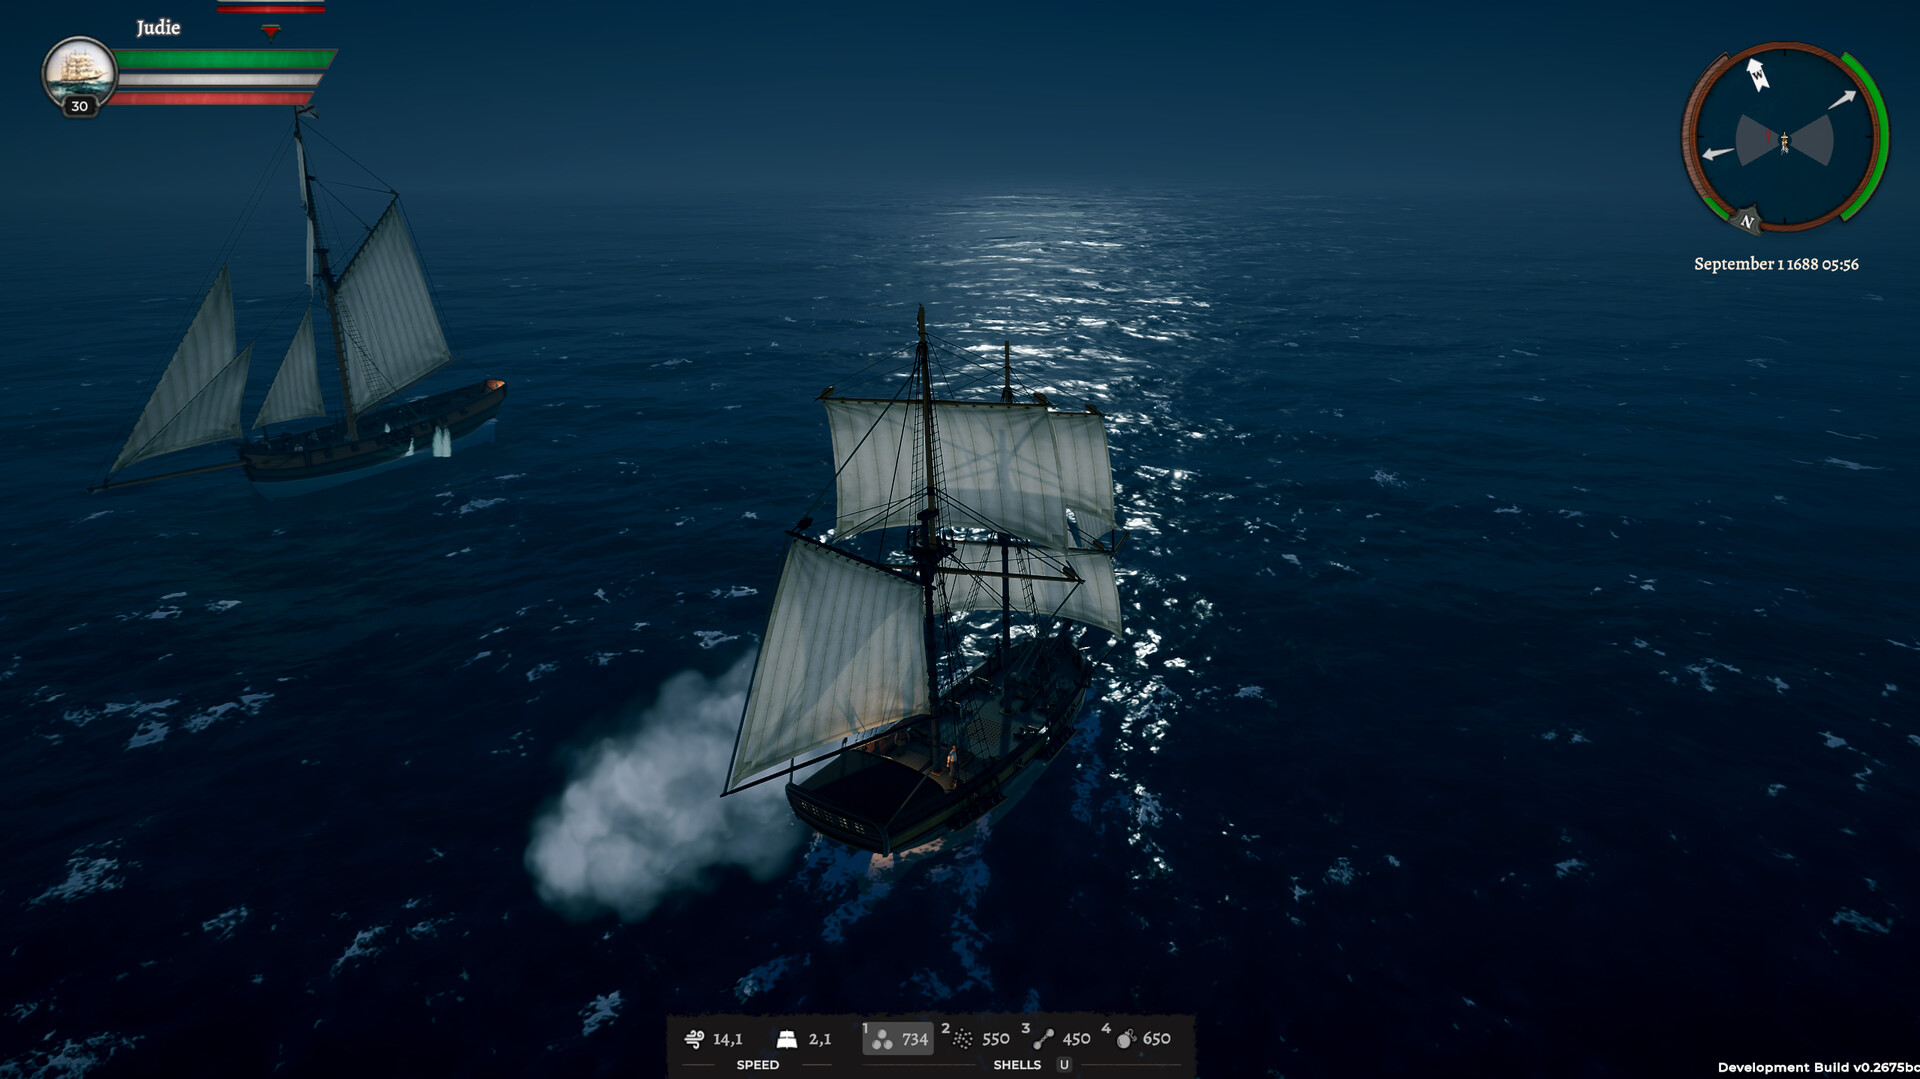 Corsairs Legacy - Pirate Action RPG & Sea Battles on Steam